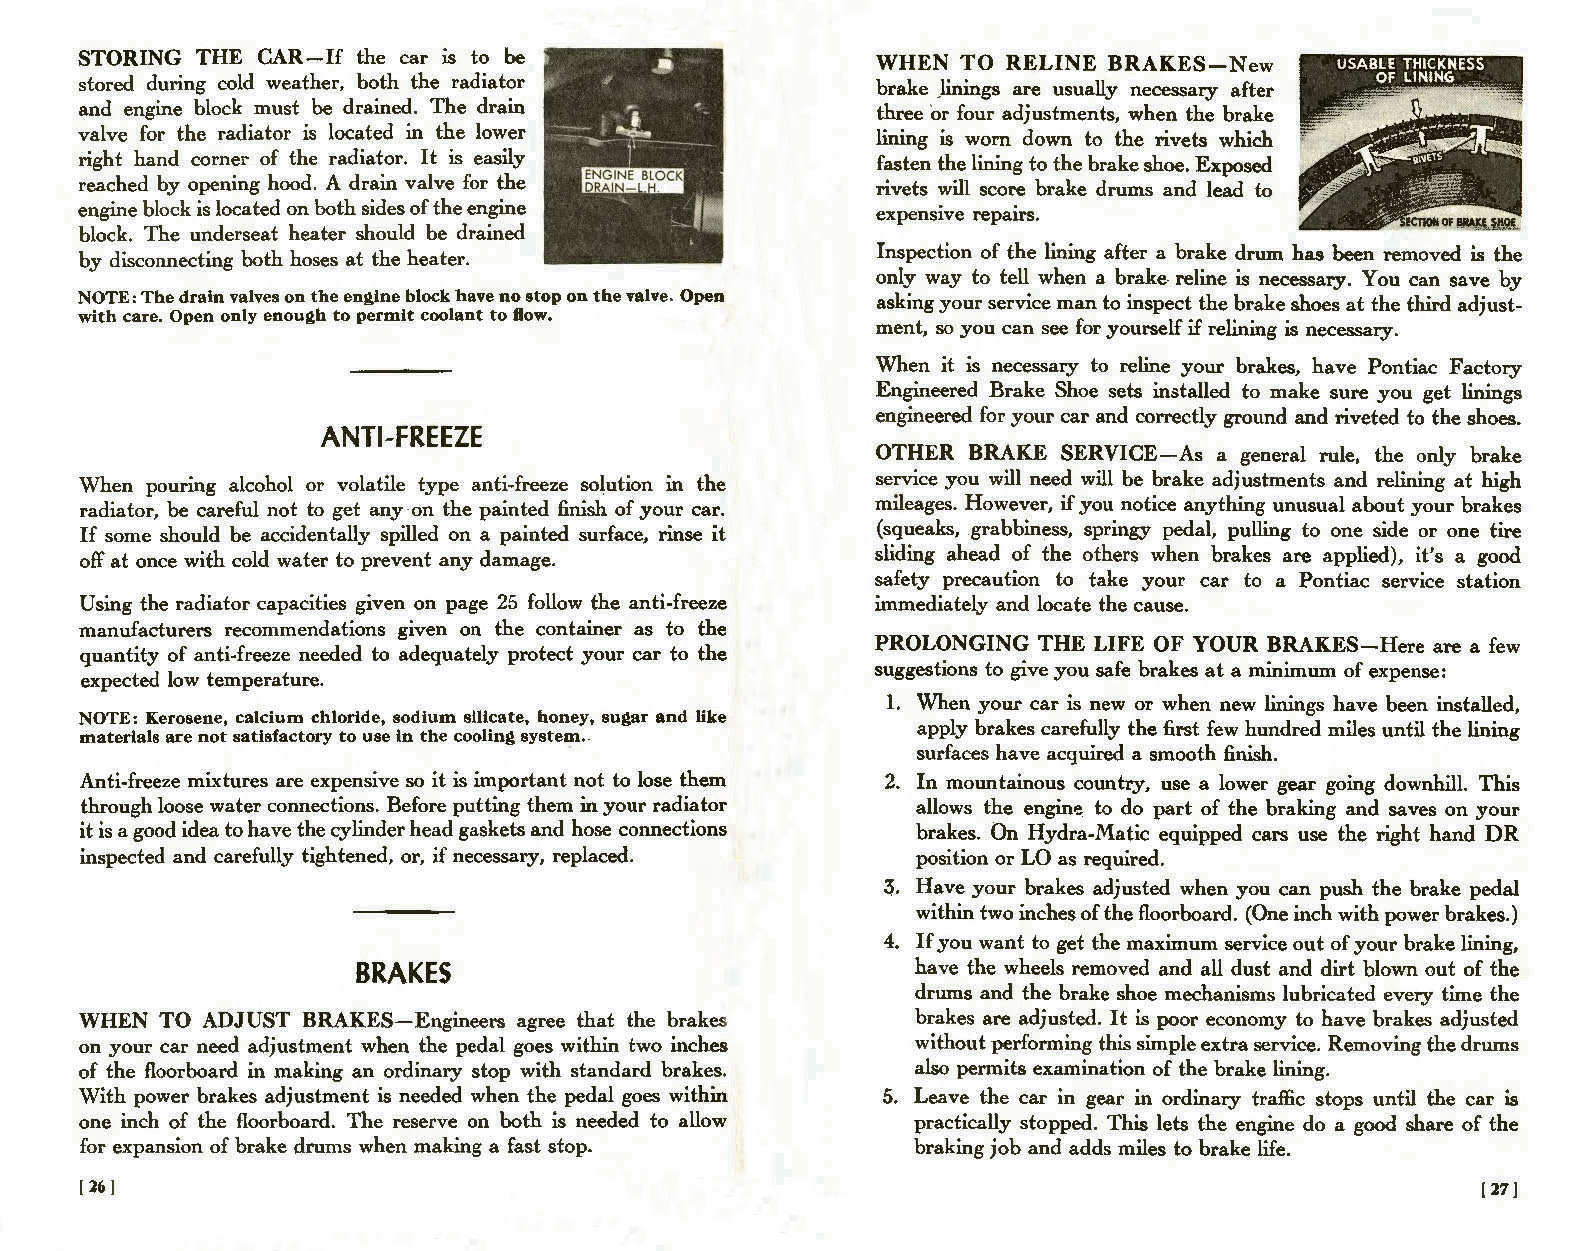 1957_Pontiac_Owners_Guide-26-27